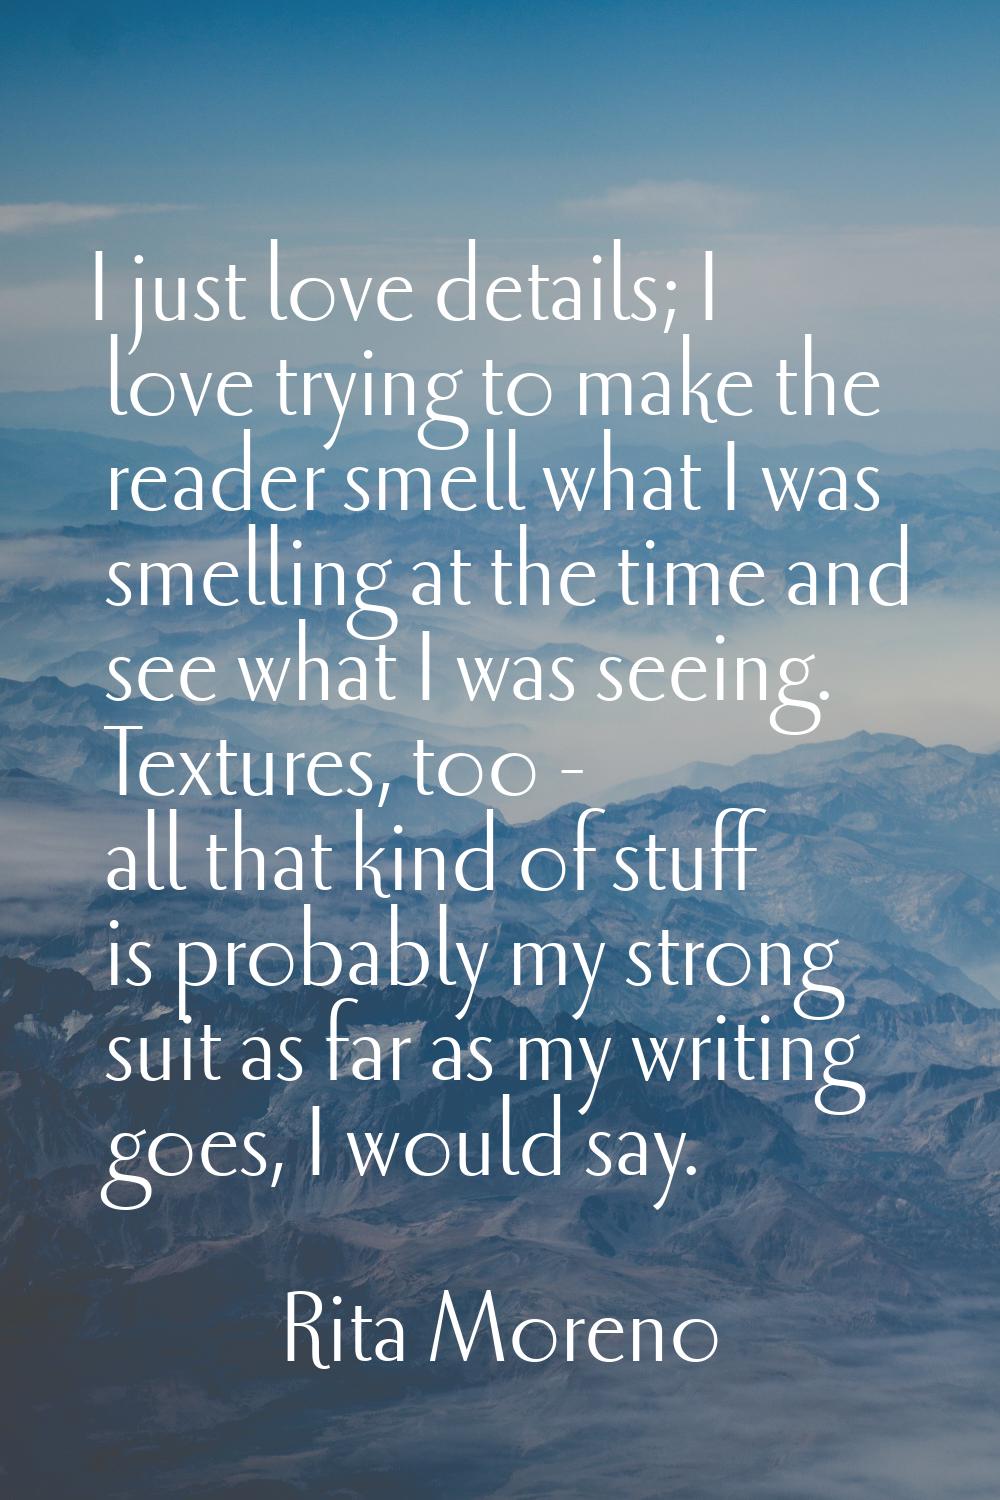 I just love details; I love trying to make the reader smell what I was smelling at the time and see